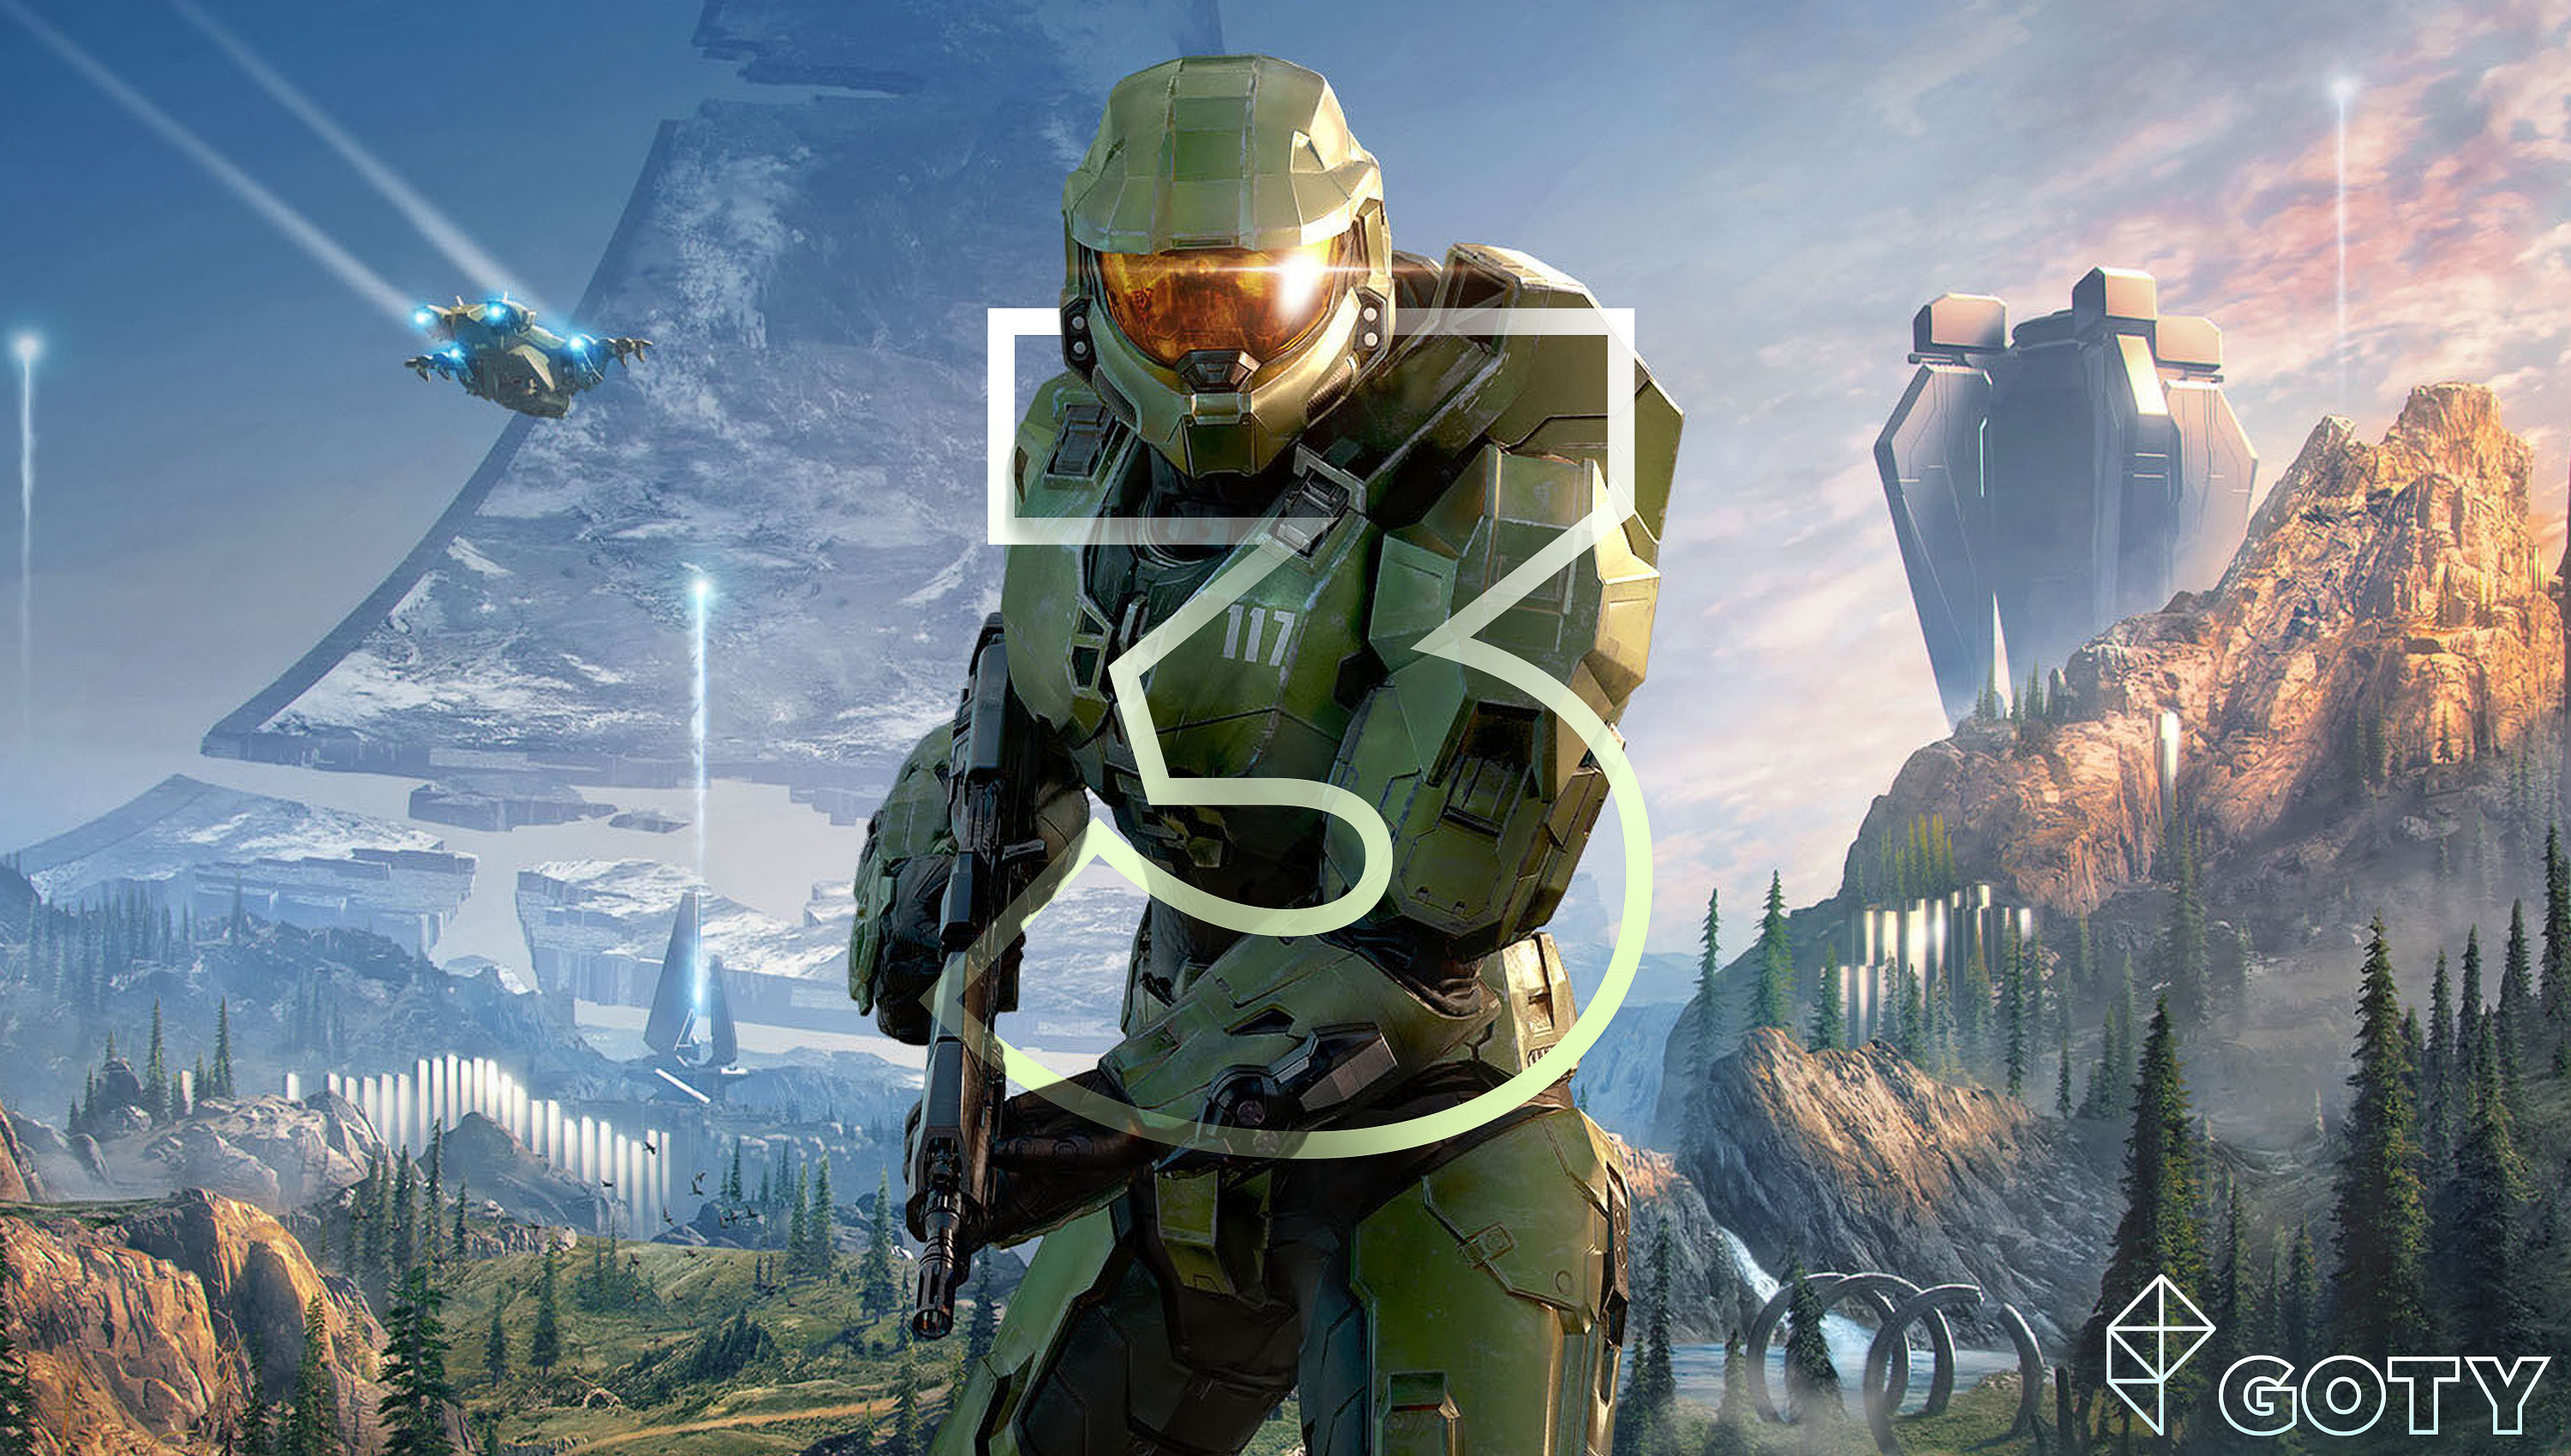 Halo Infinite is Polygon’s No. 3 game of the year